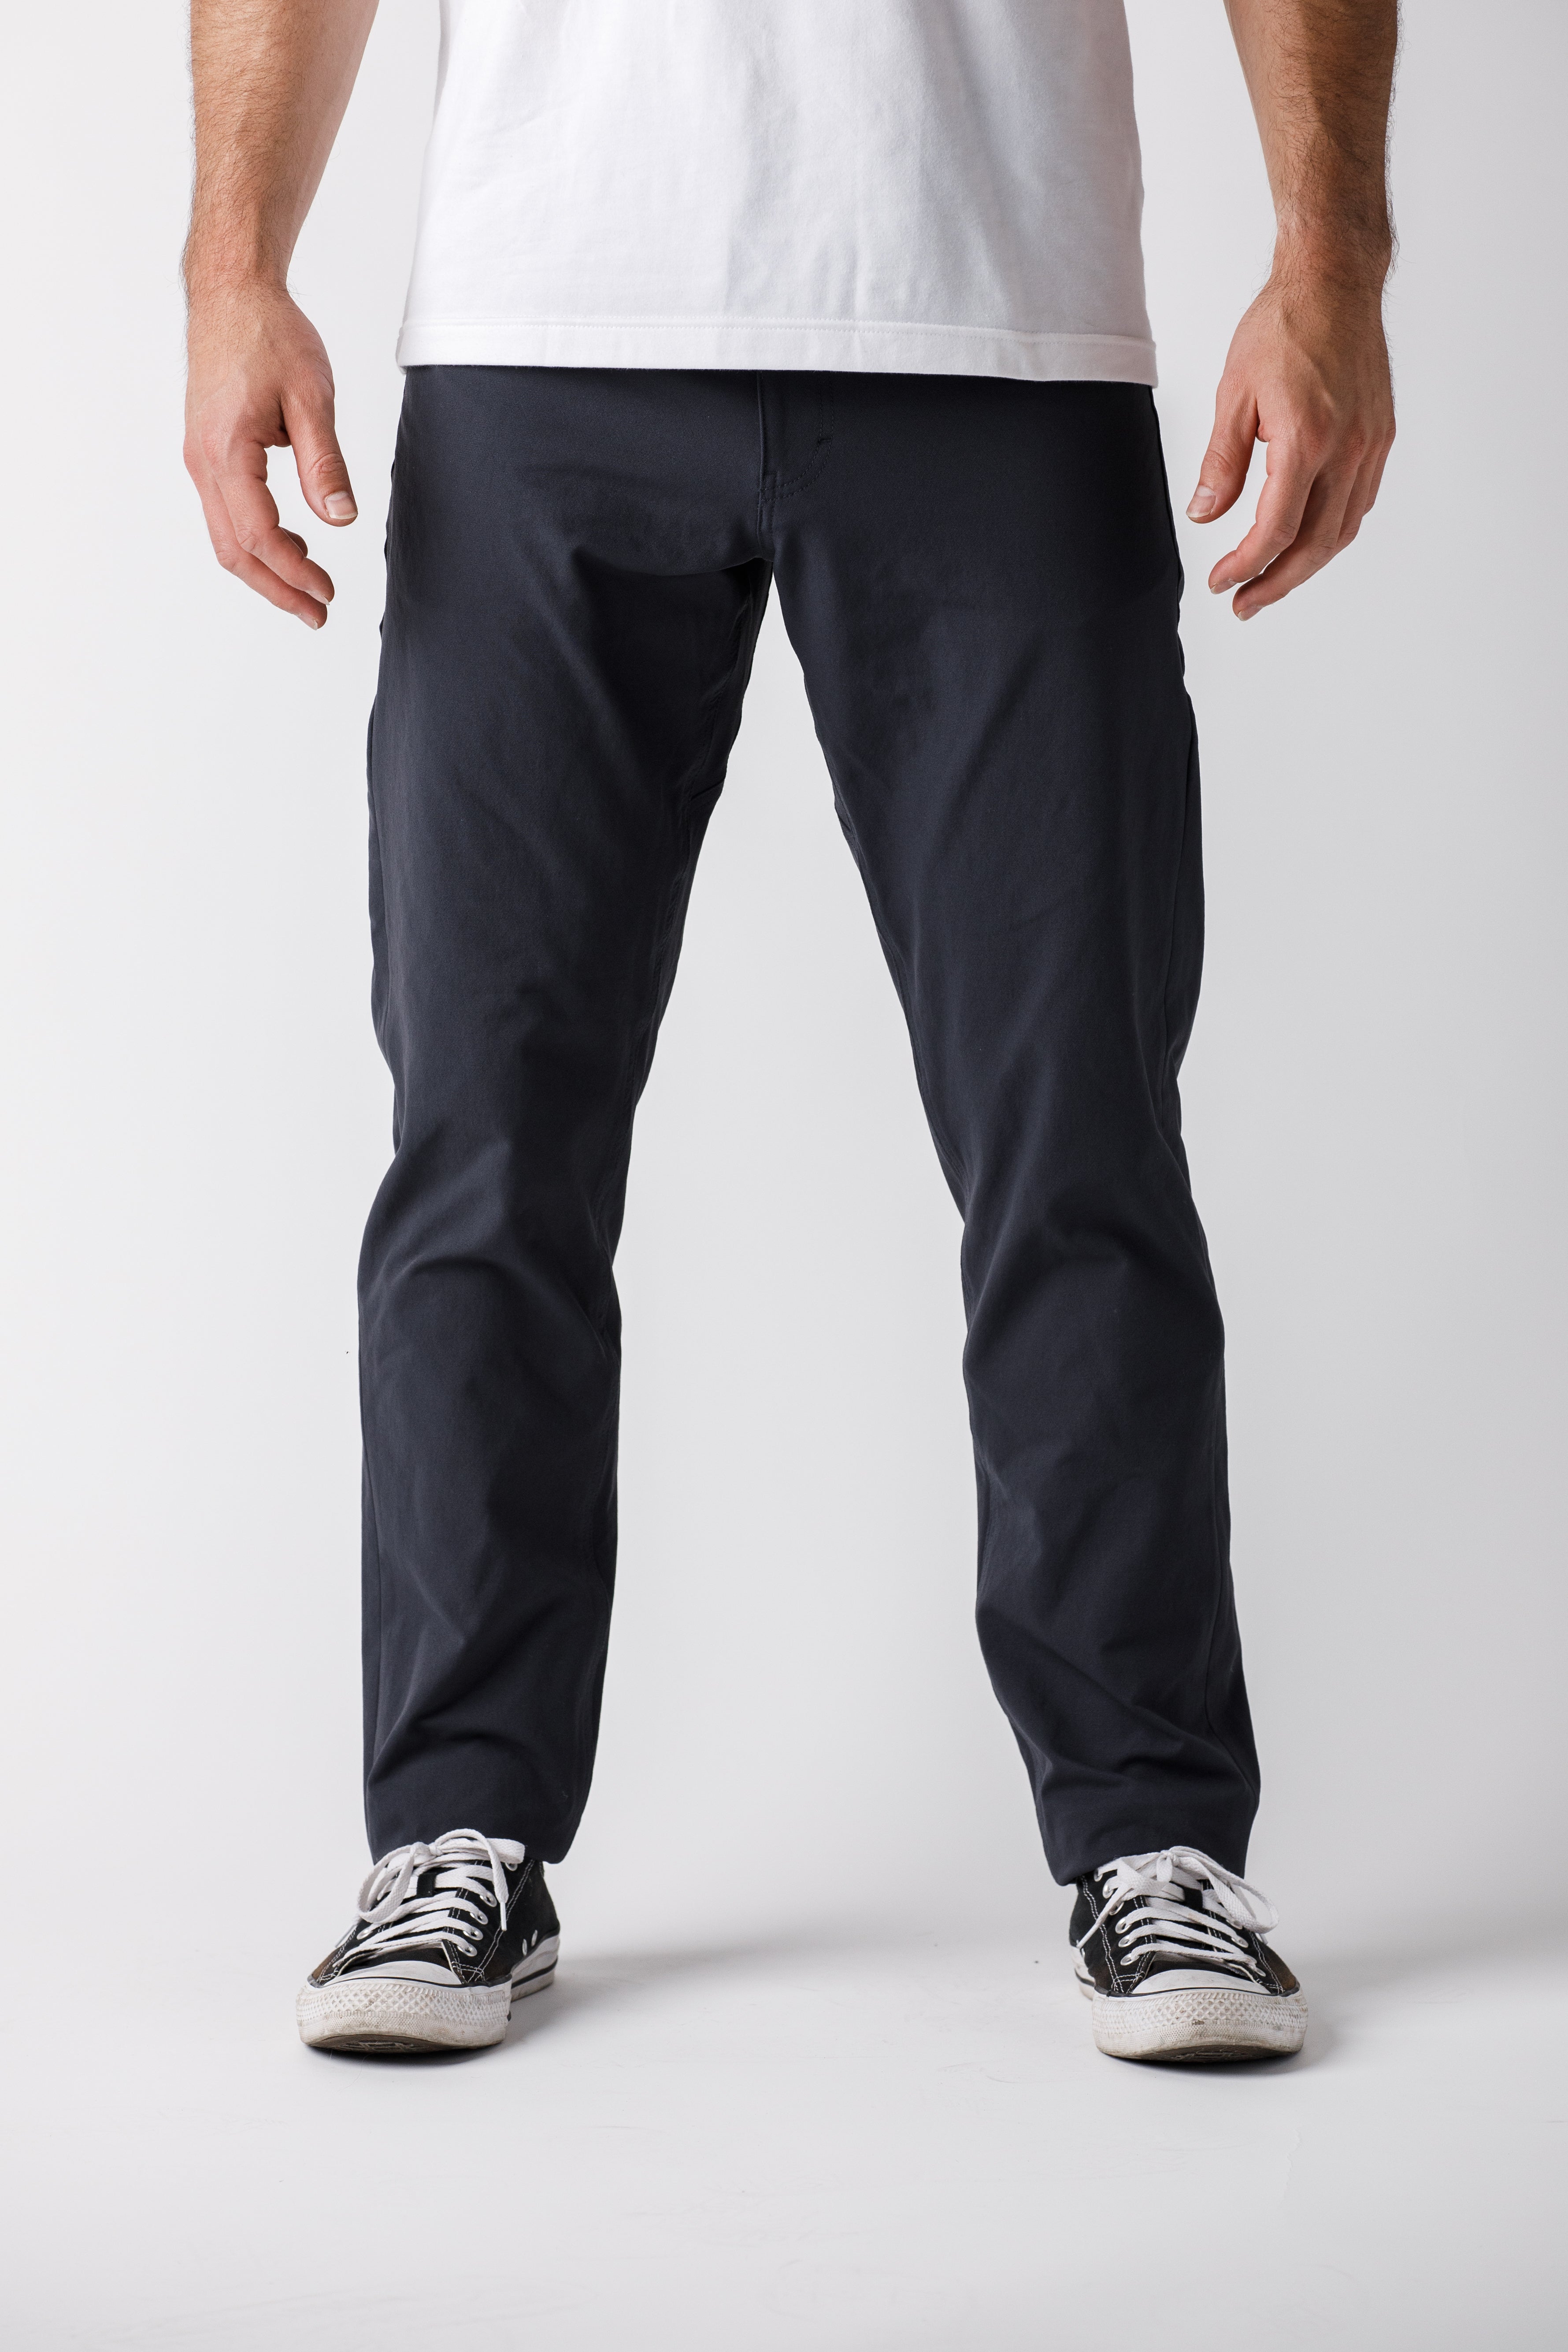 H&W: Weston is 6' / 180lbs. wearing size 32#color_navy